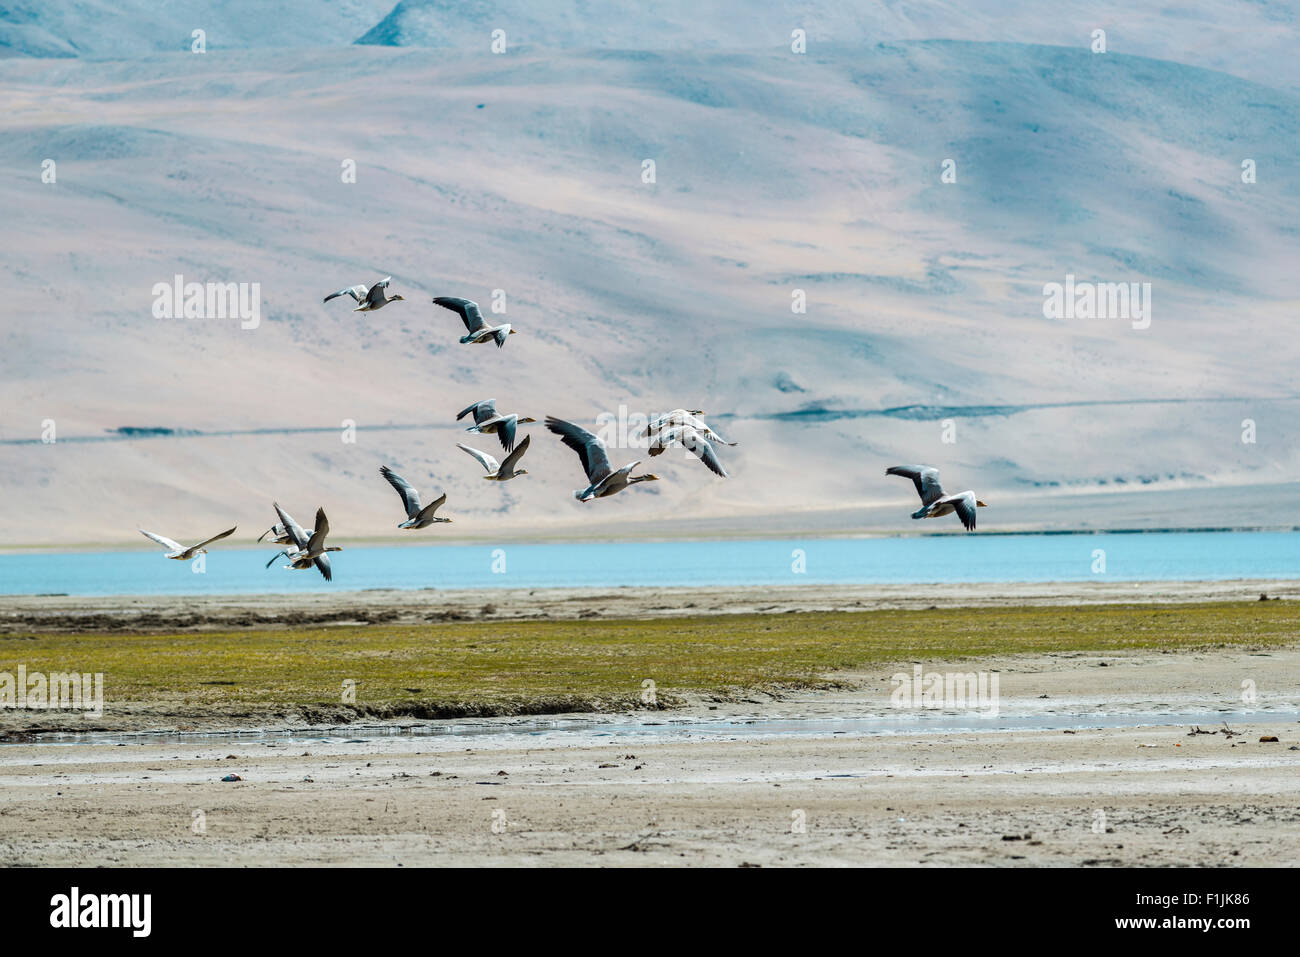 A flock of Bar-headed Geese (Anser indicus) flying over the barren landscape and the turquoise water of Tso Moriri Stock Photo